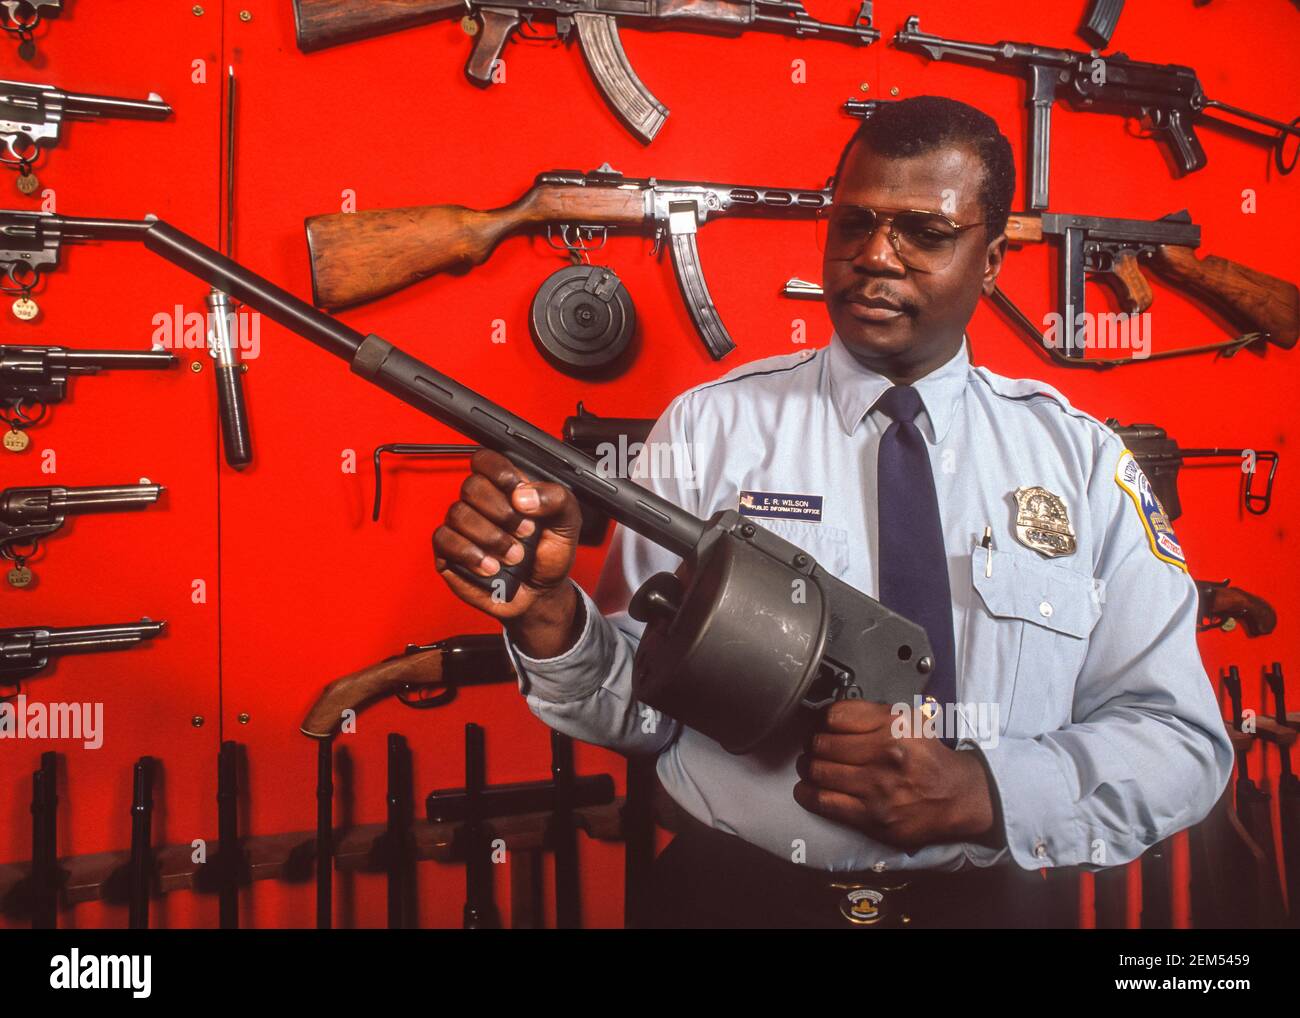 WASHINGTON, DC, USA - Police officer holds gun in front of display of confiscated guns, seized on streets by DC's Metropolitan Police Department, MPD. Stock Photo